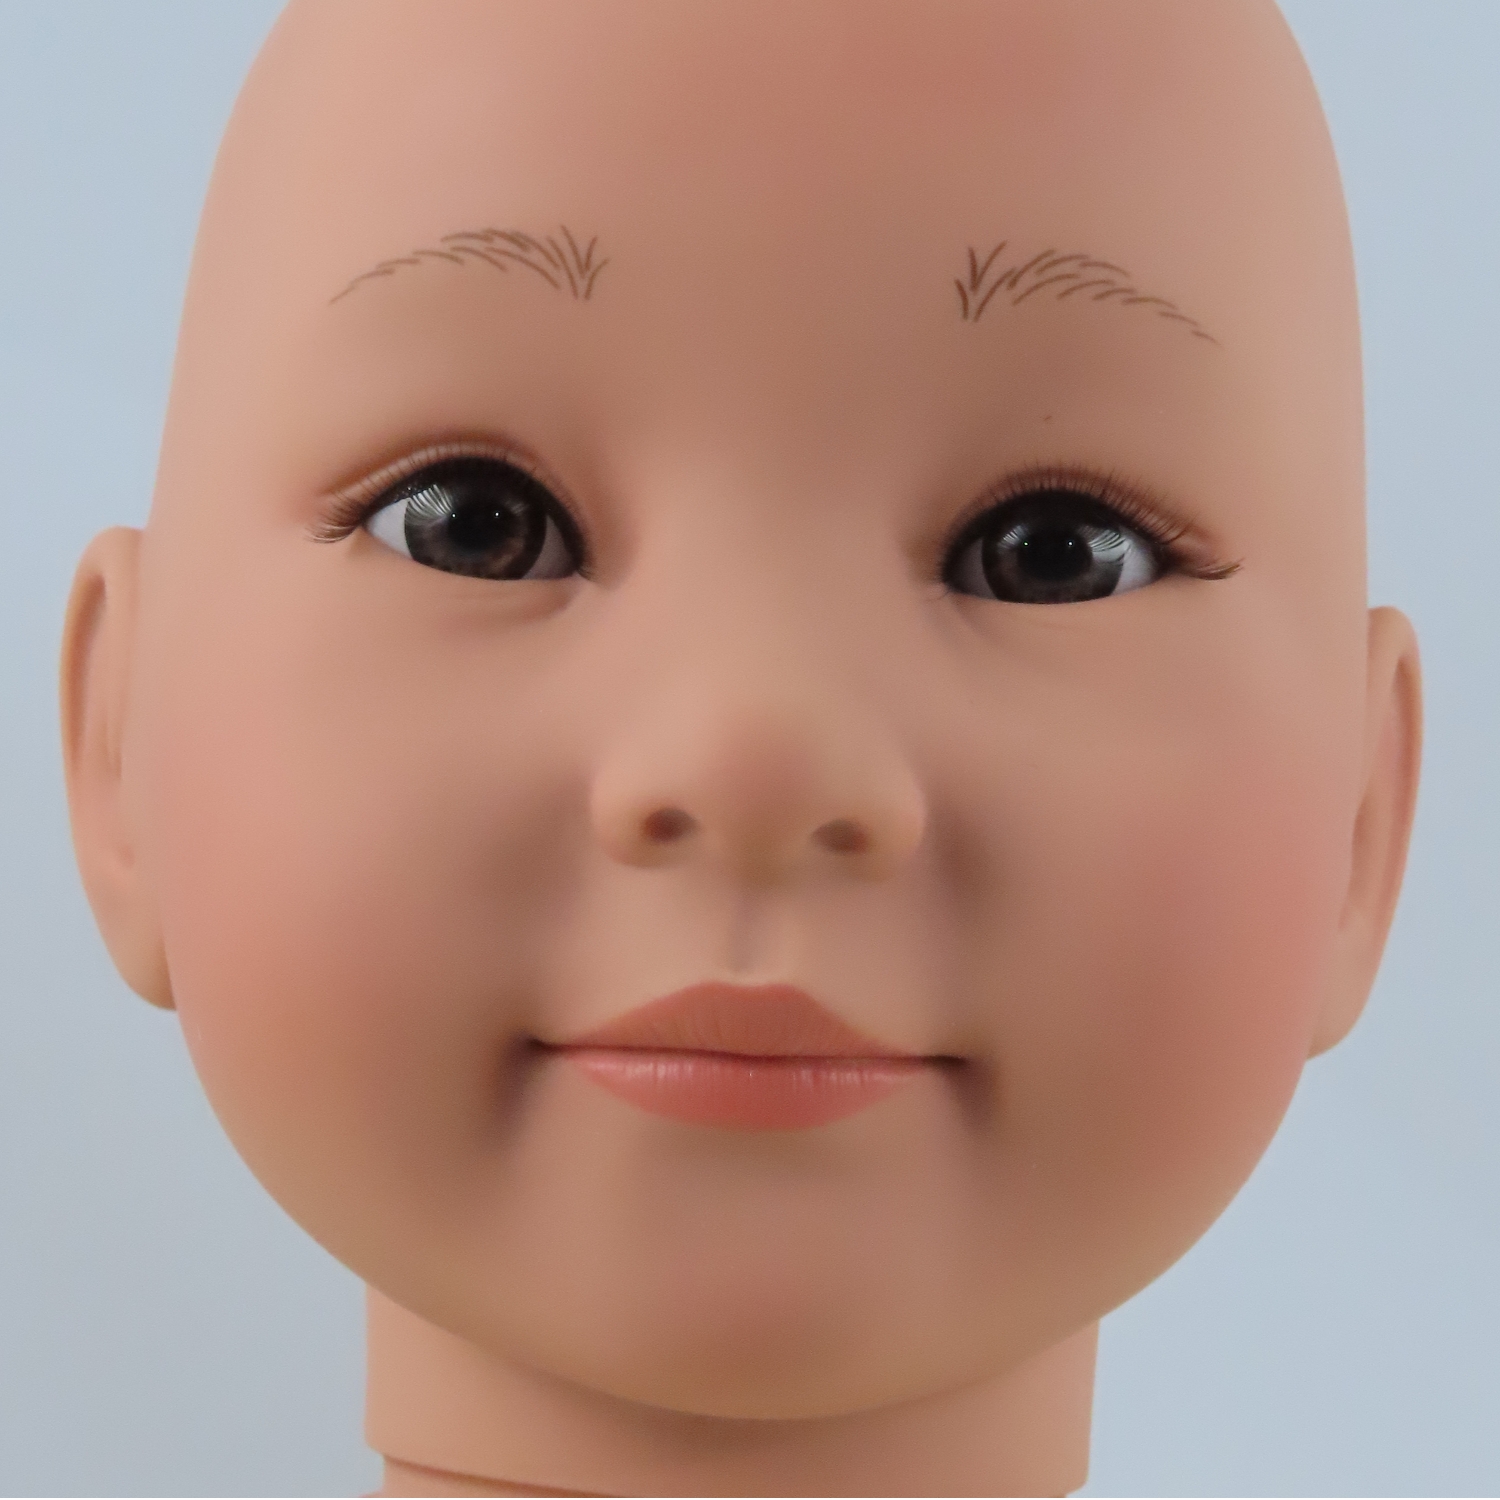 Milee Doll Kit for Creating Toddler and Baby Dolls That Look Real